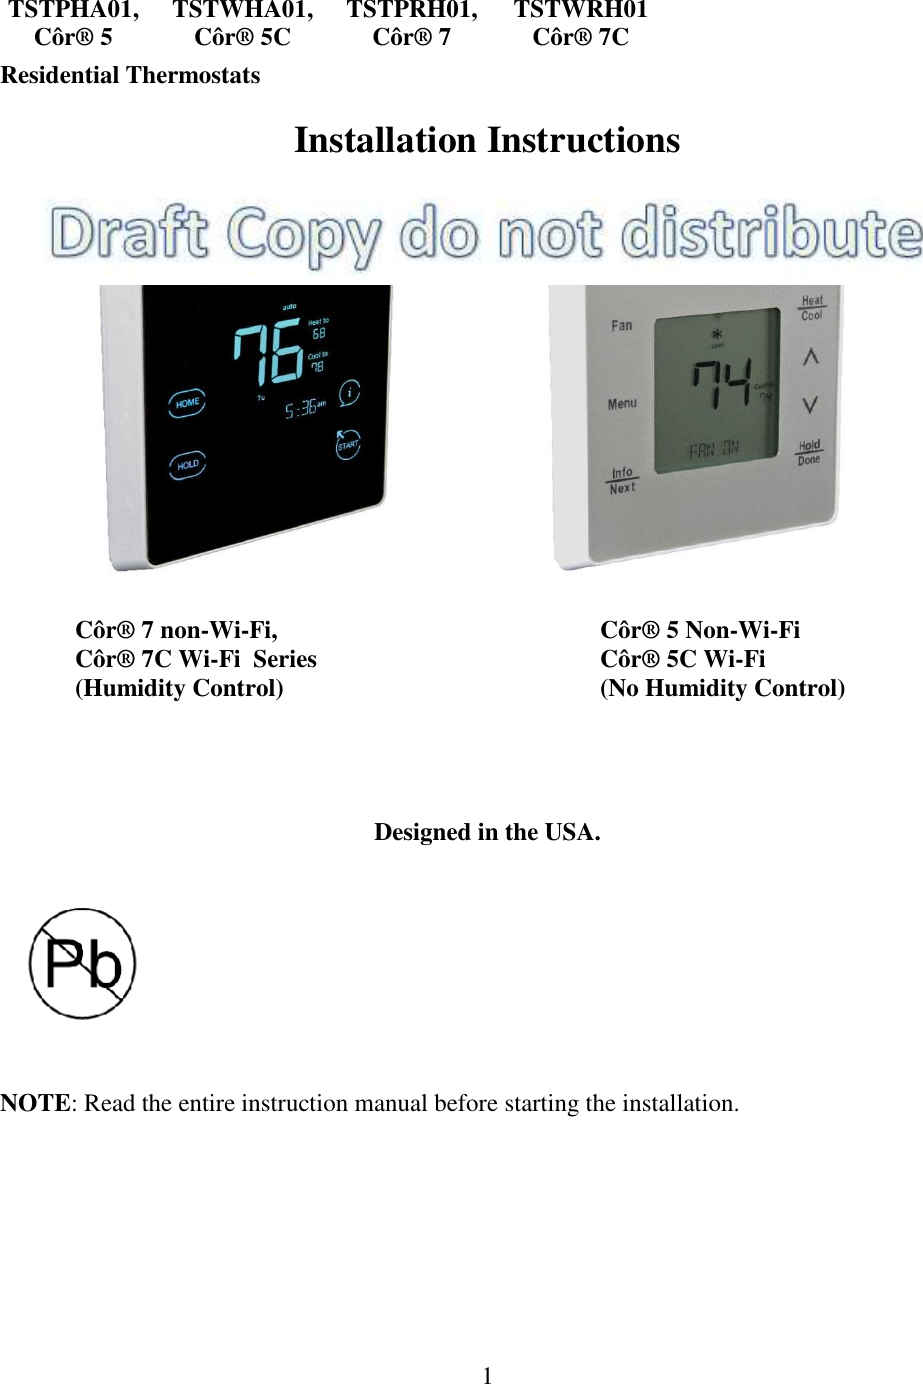 1  TSTPHA01, TSTWHA01, TSTPRH01, TSTWRH01 Côr® 5 Côr® 5C Côr® 7 Côr® 7C Residential Thermostats  Installation Instructions        Côr® 7 non-Wi-Fi,           Côr® 5 Non-Wi-Fi  Côr® 7C Wi-Fi  Series        Côr® 5C Wi-Fi  (Humidity Control)          (No Humidity Control)     Designed in the USA.      NOTE: Read the entire instruction manual before starting the installation.  